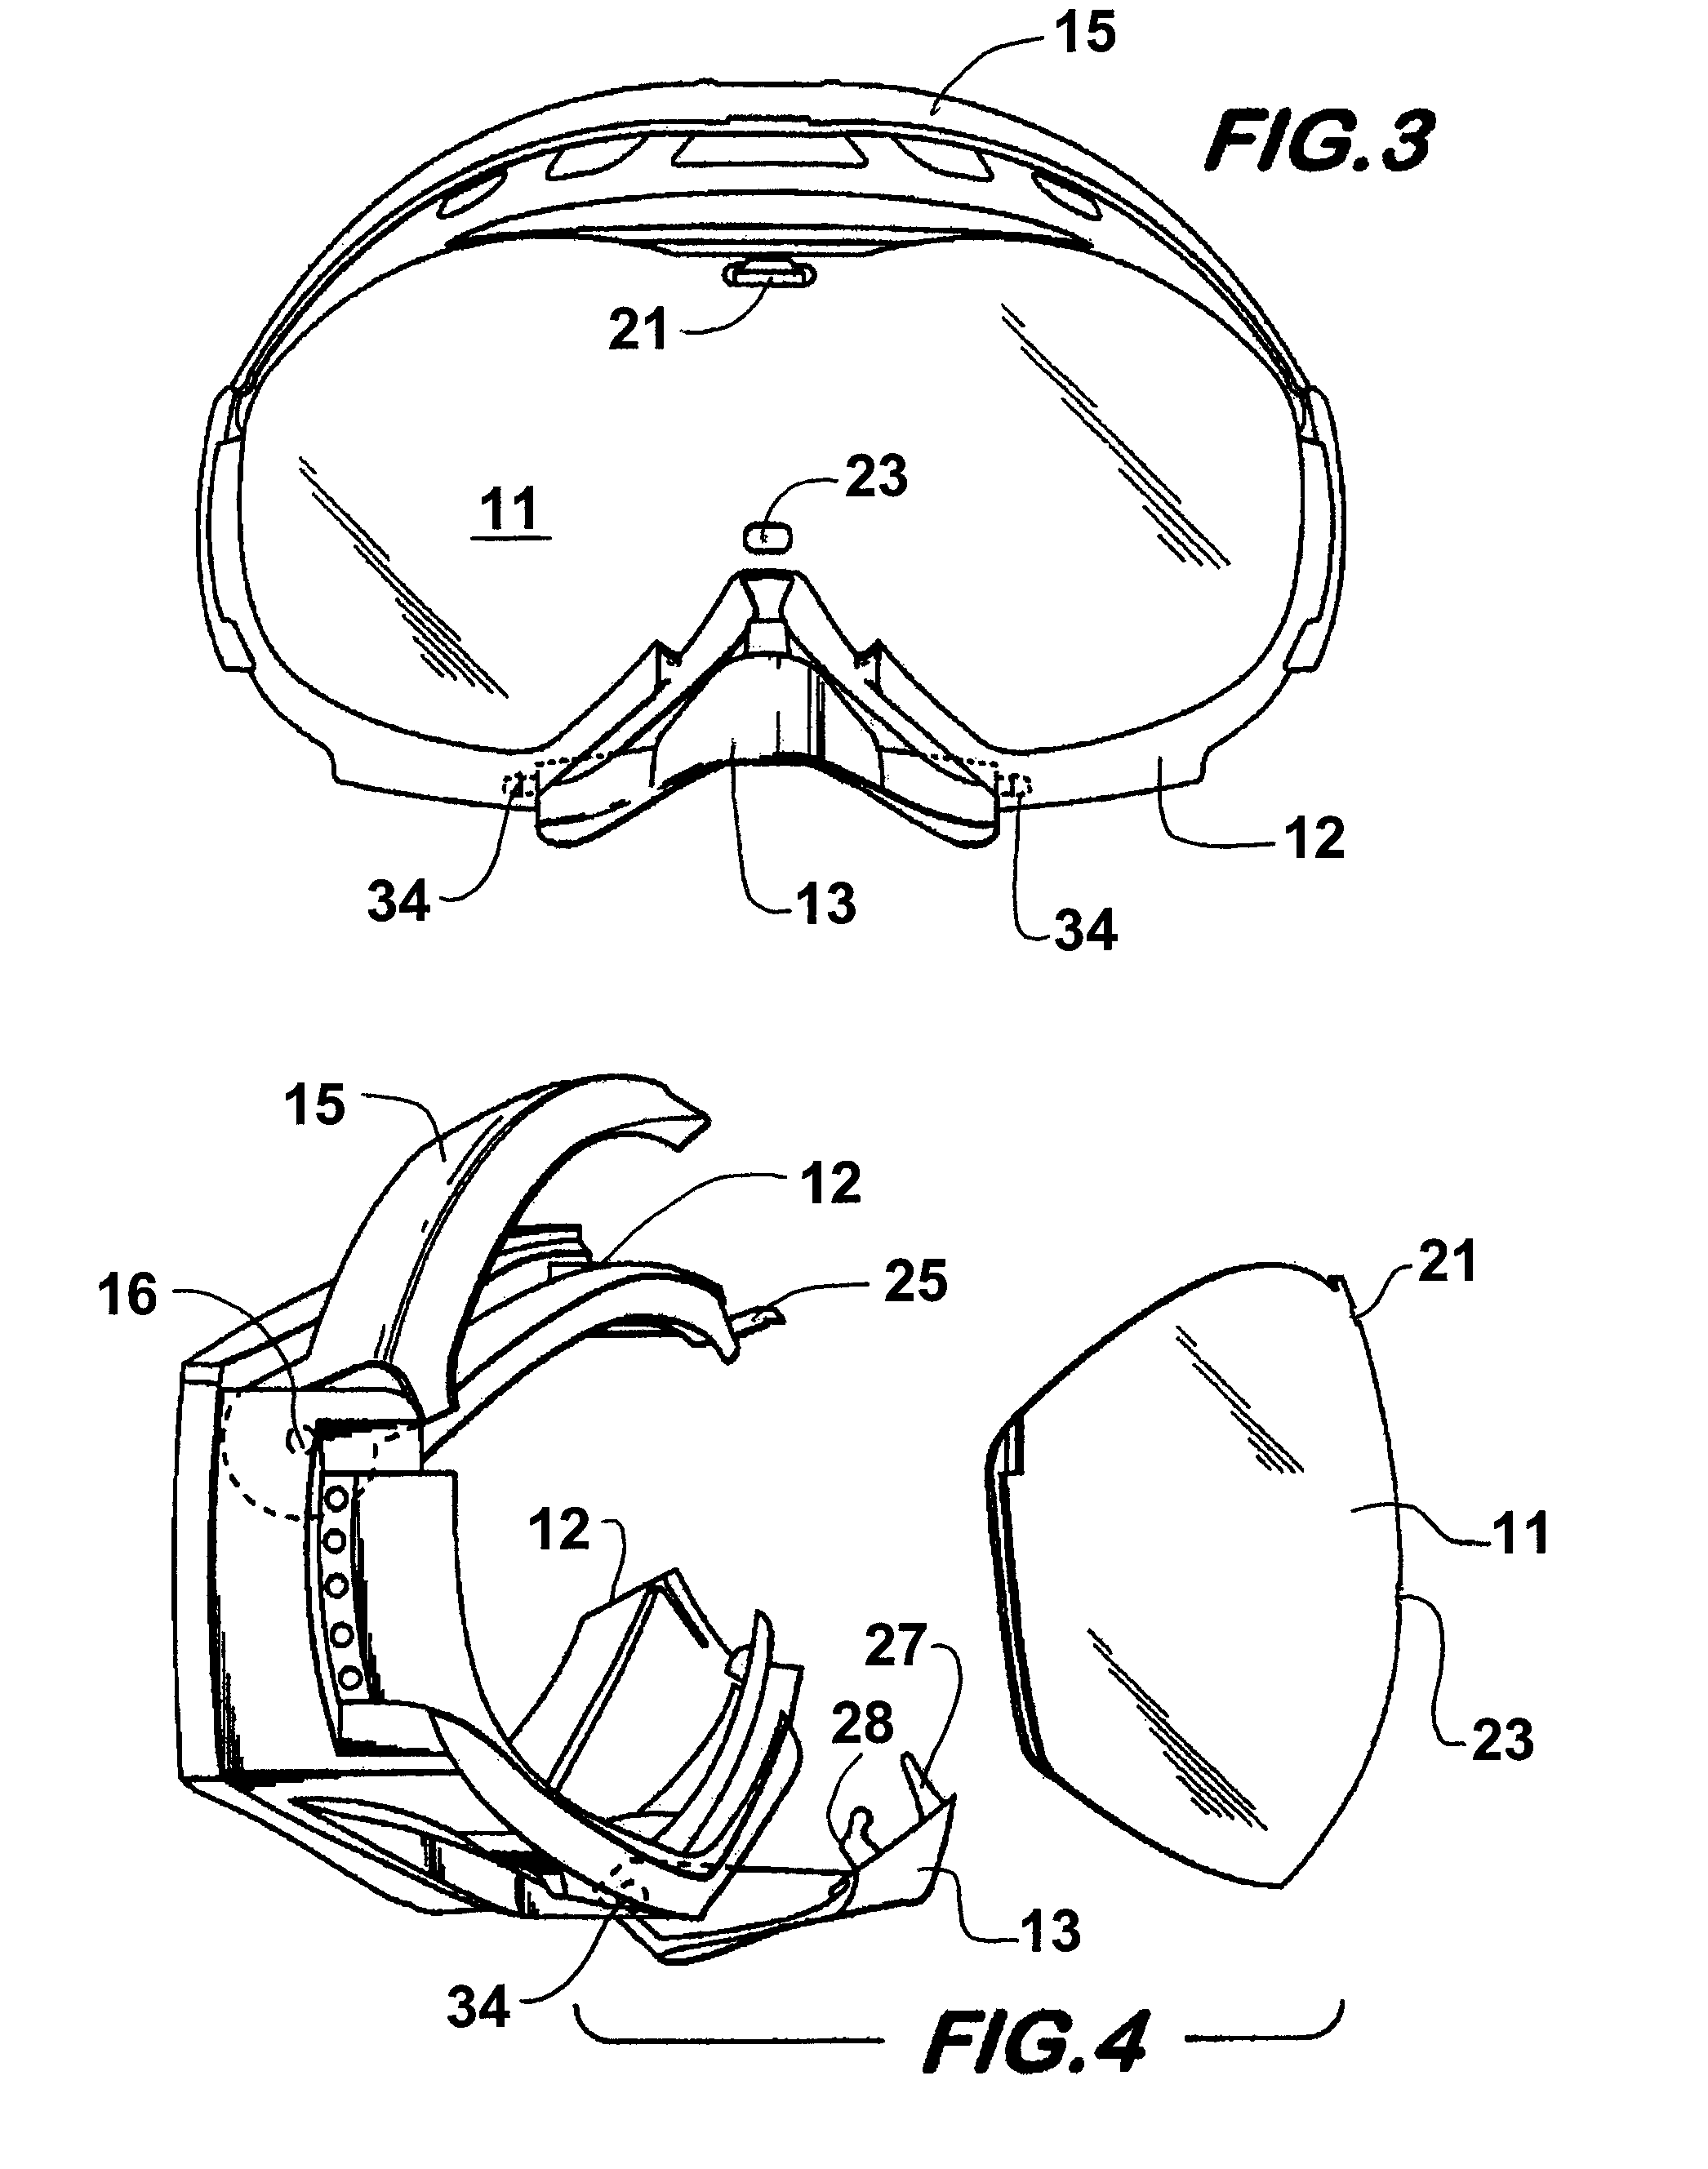 Goggles with interchangeable lens